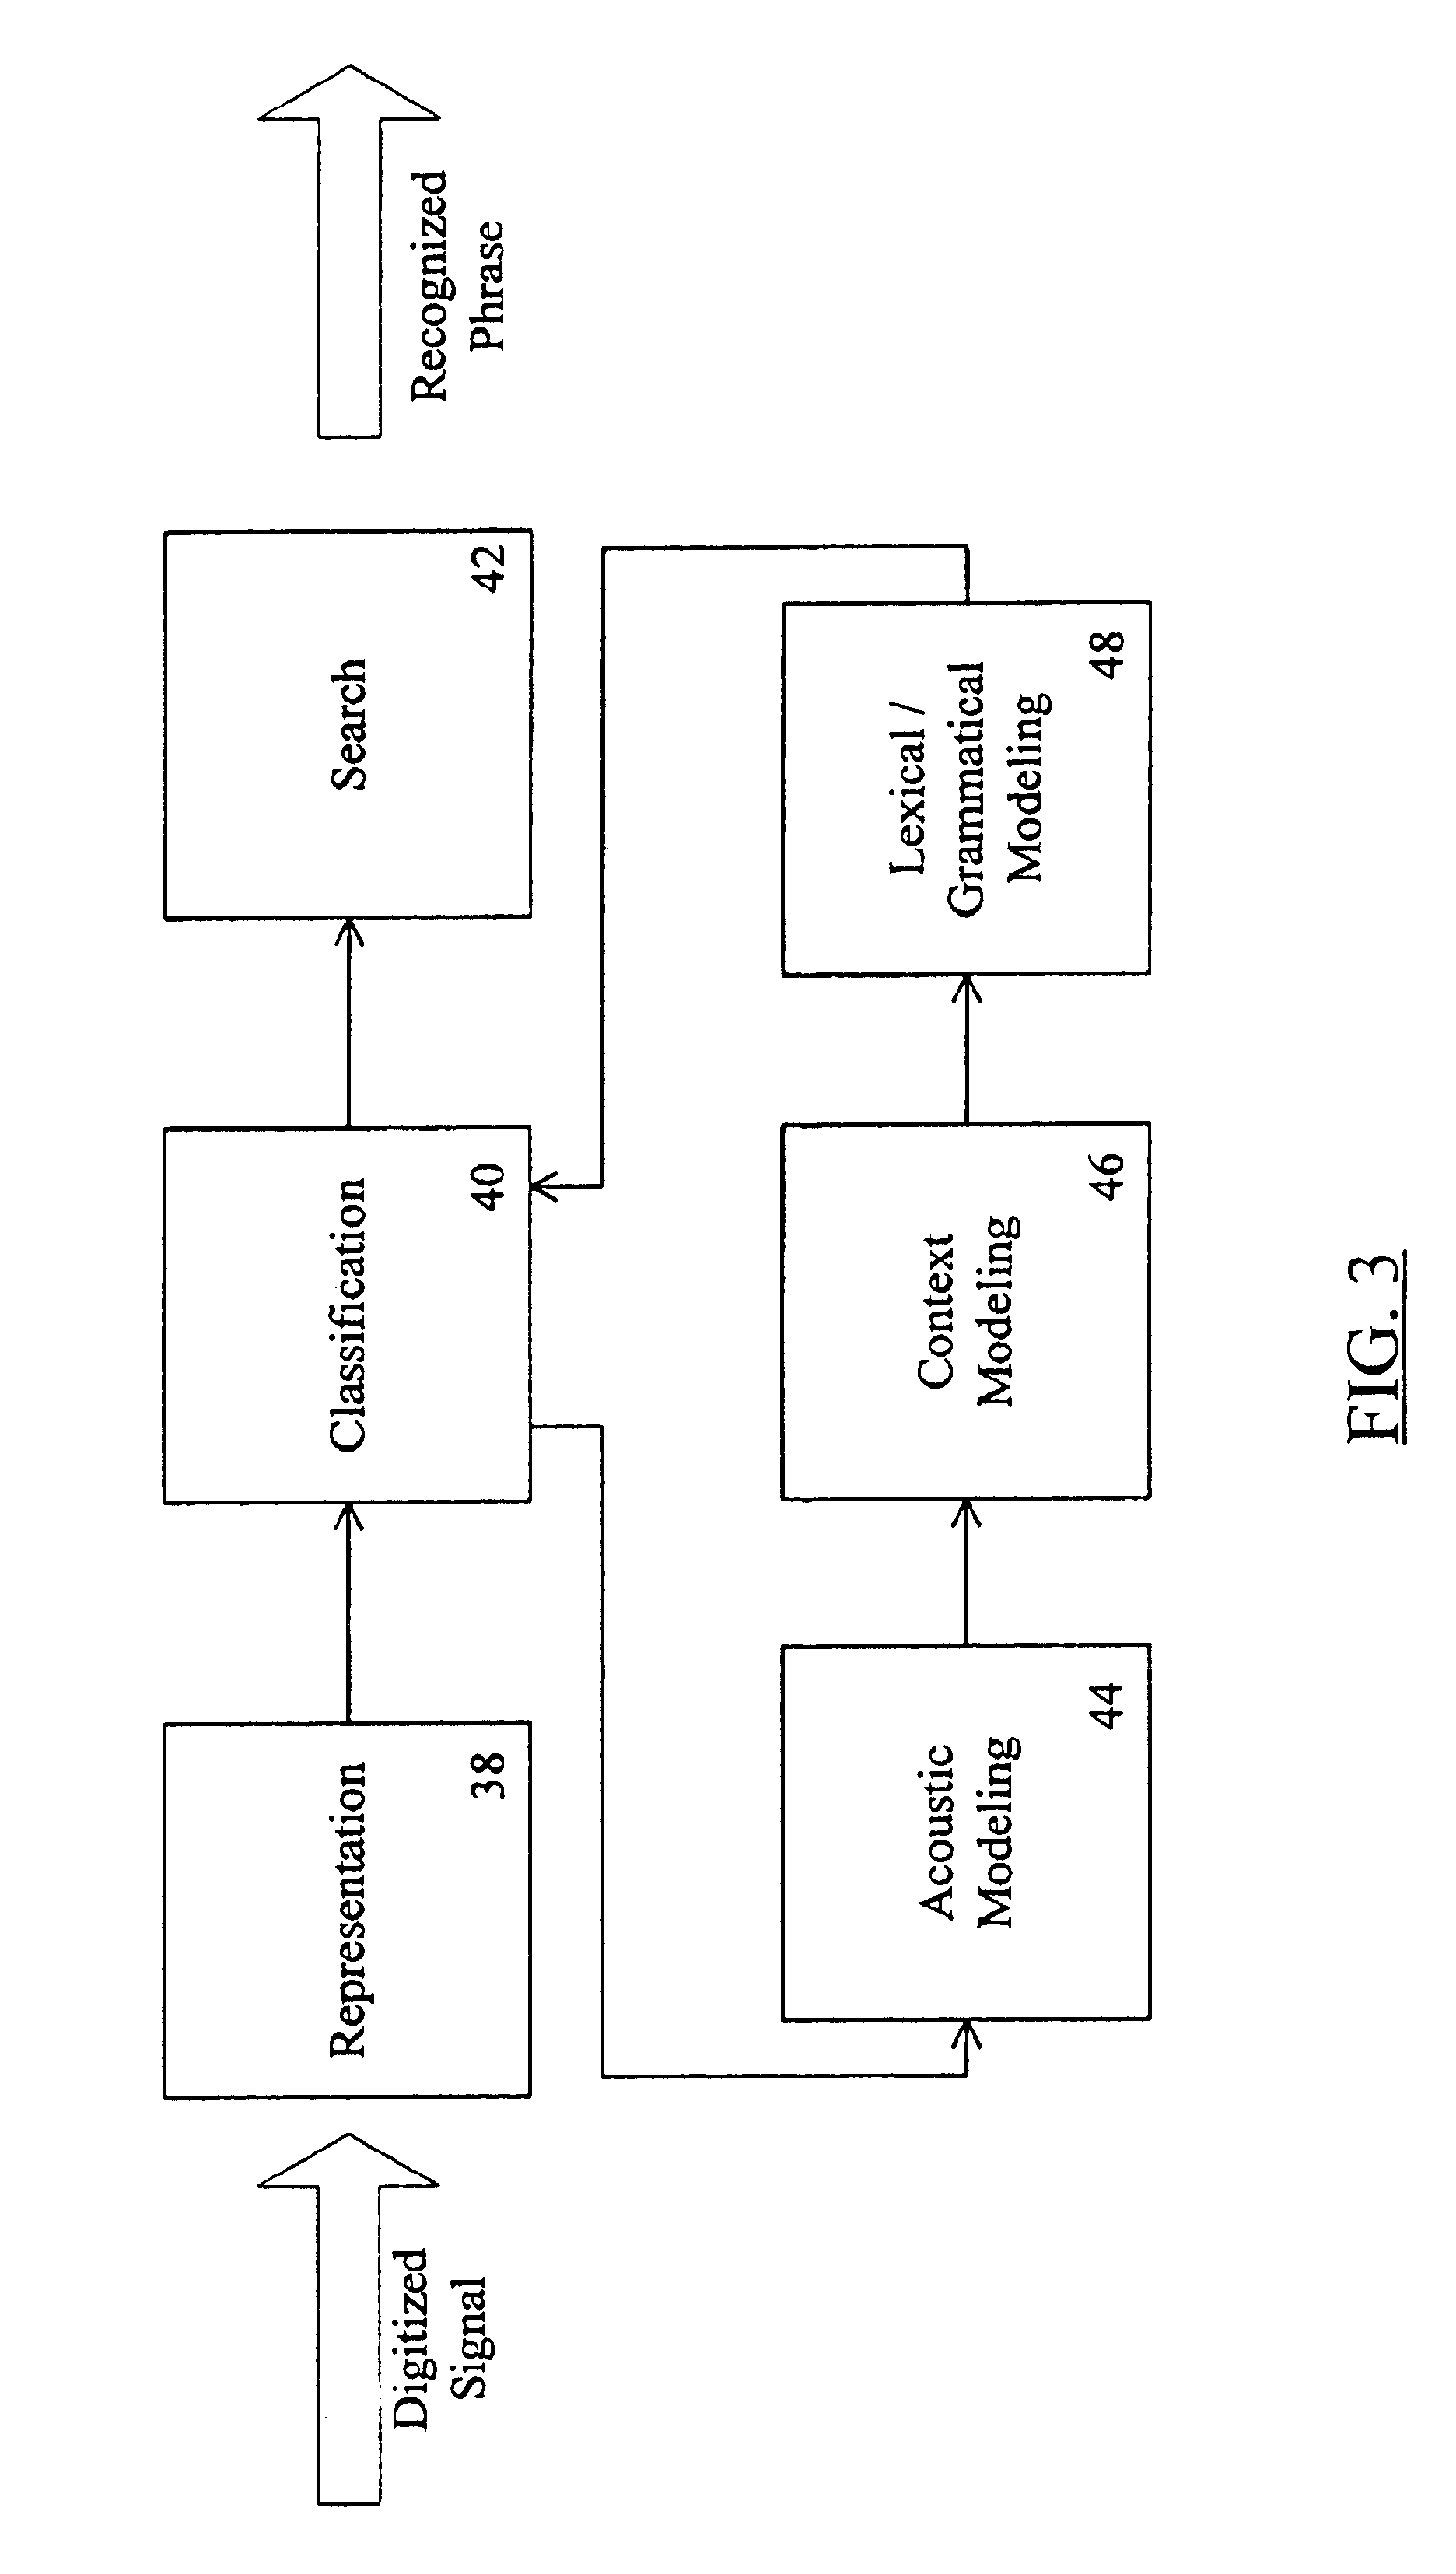 Method and apparatus for executing voice commands having dictation as a parameter